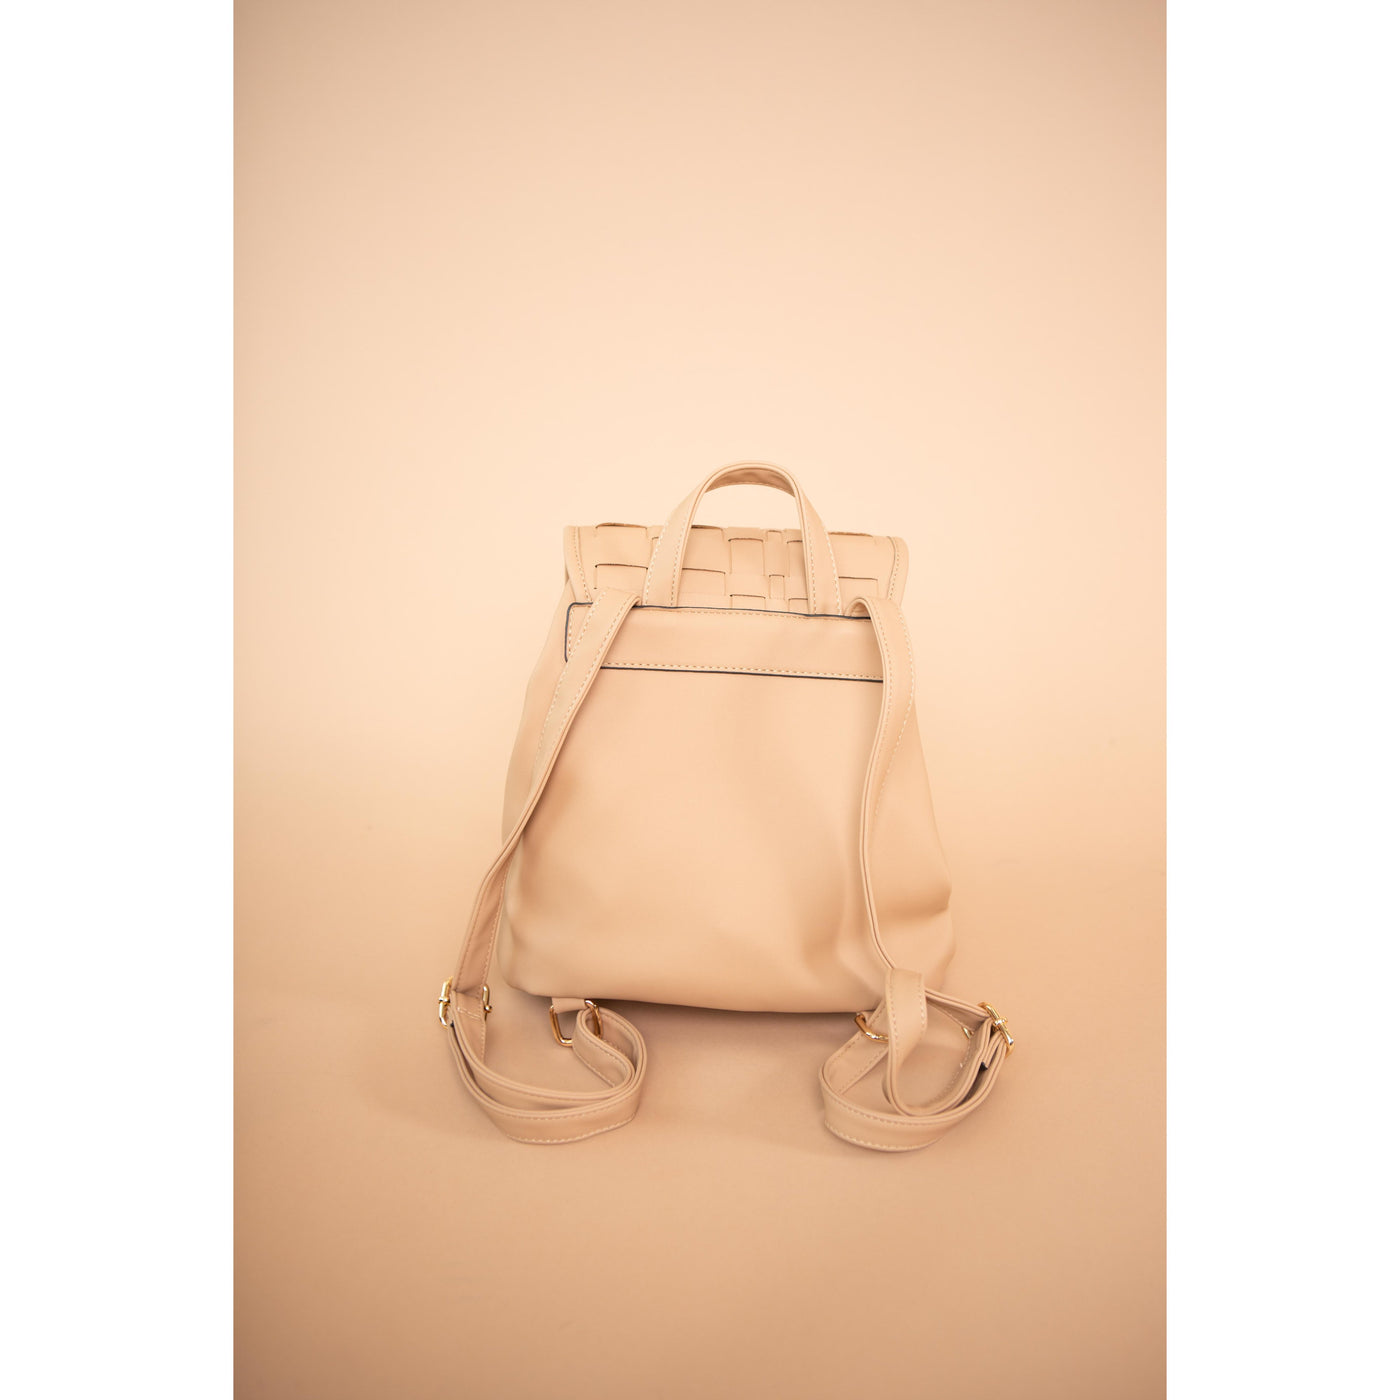 Grab N Go Vegan Leather Backpack-W Bag-Graceful & Chic Boutique, Family Clothing Store in Waxahachie, Texas